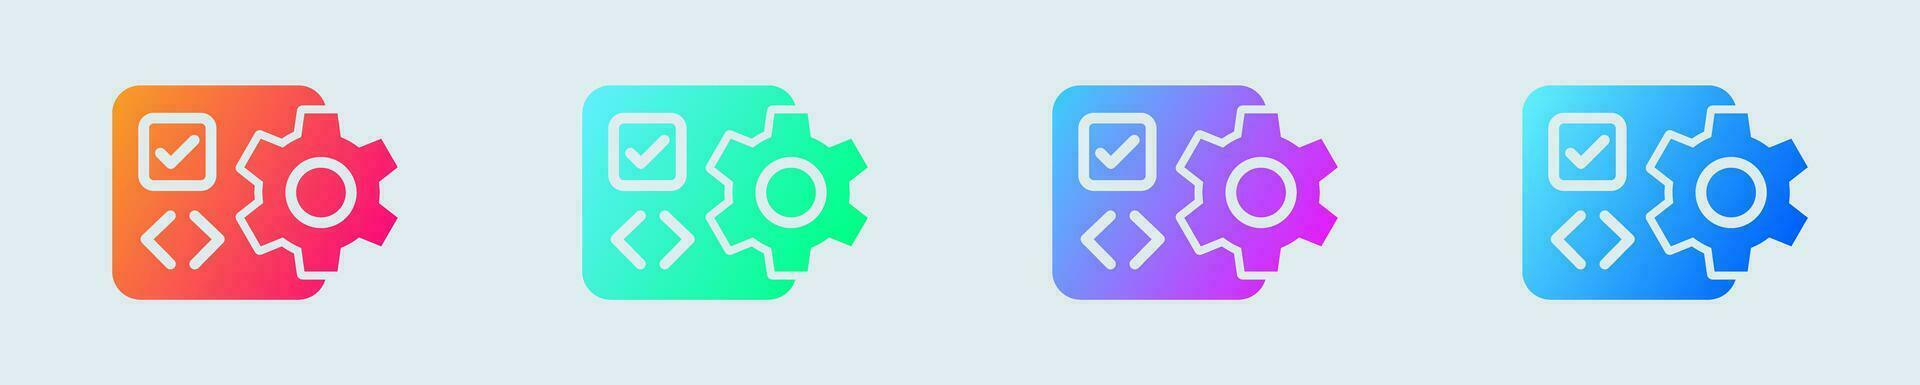 Software solid icon in gradient colors. Application signs vector illustration.